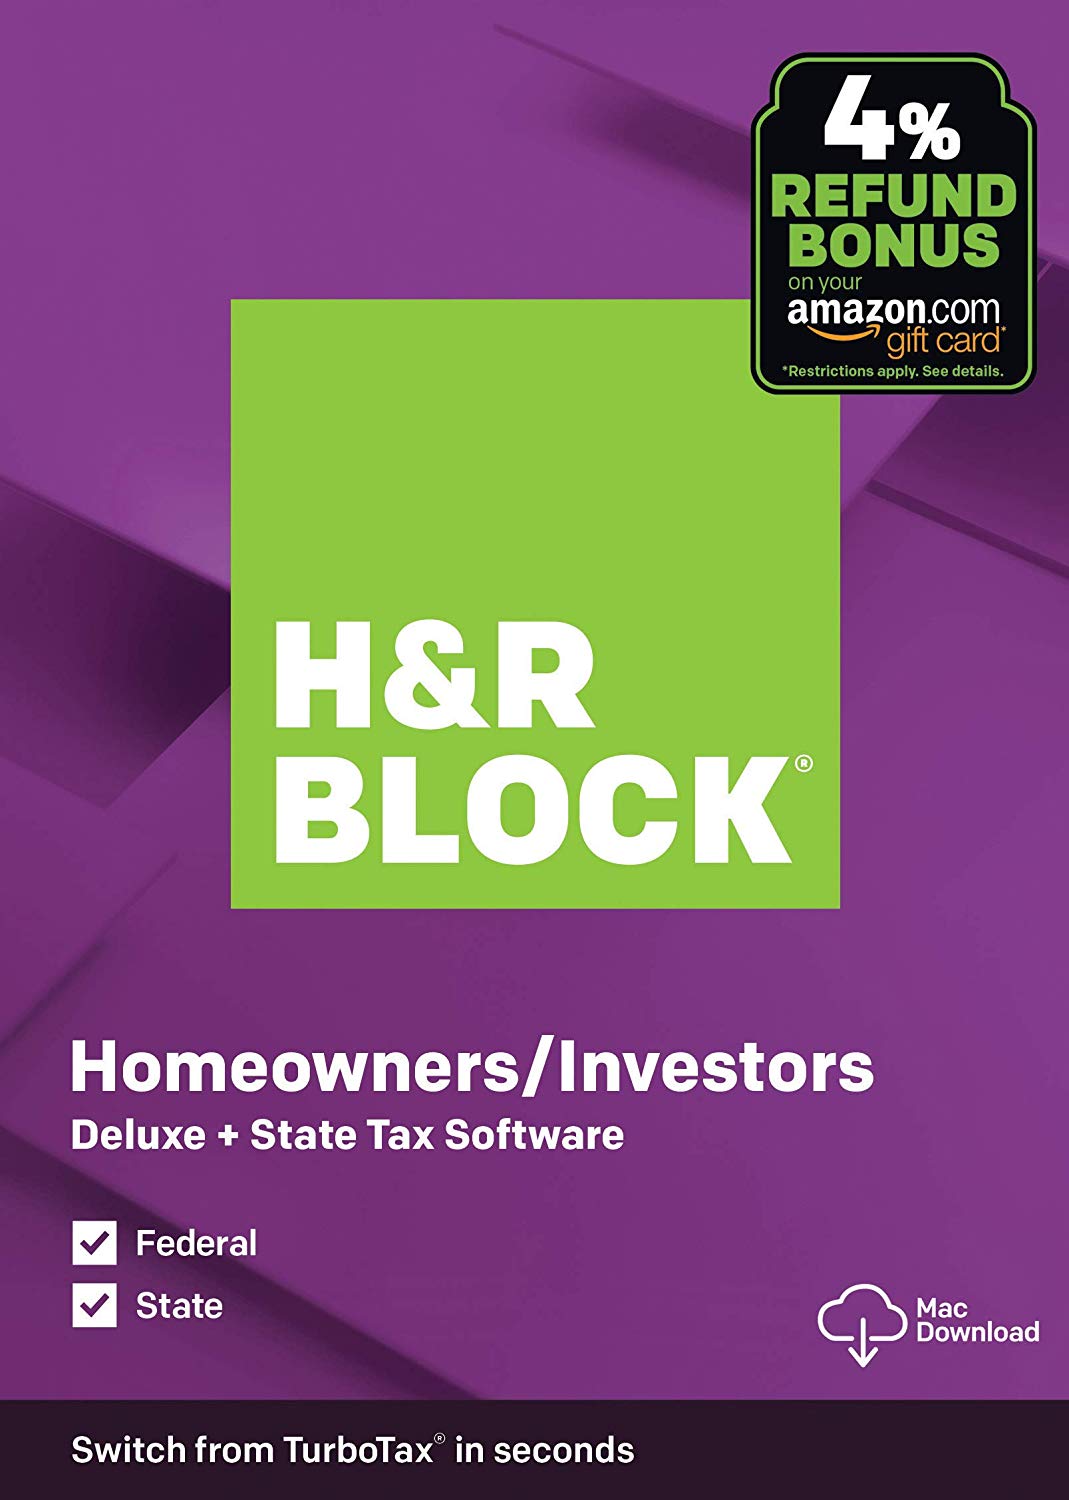 H&R Block Tax Software Deluxe + State 2019 with 4 Refund Bonus Offer